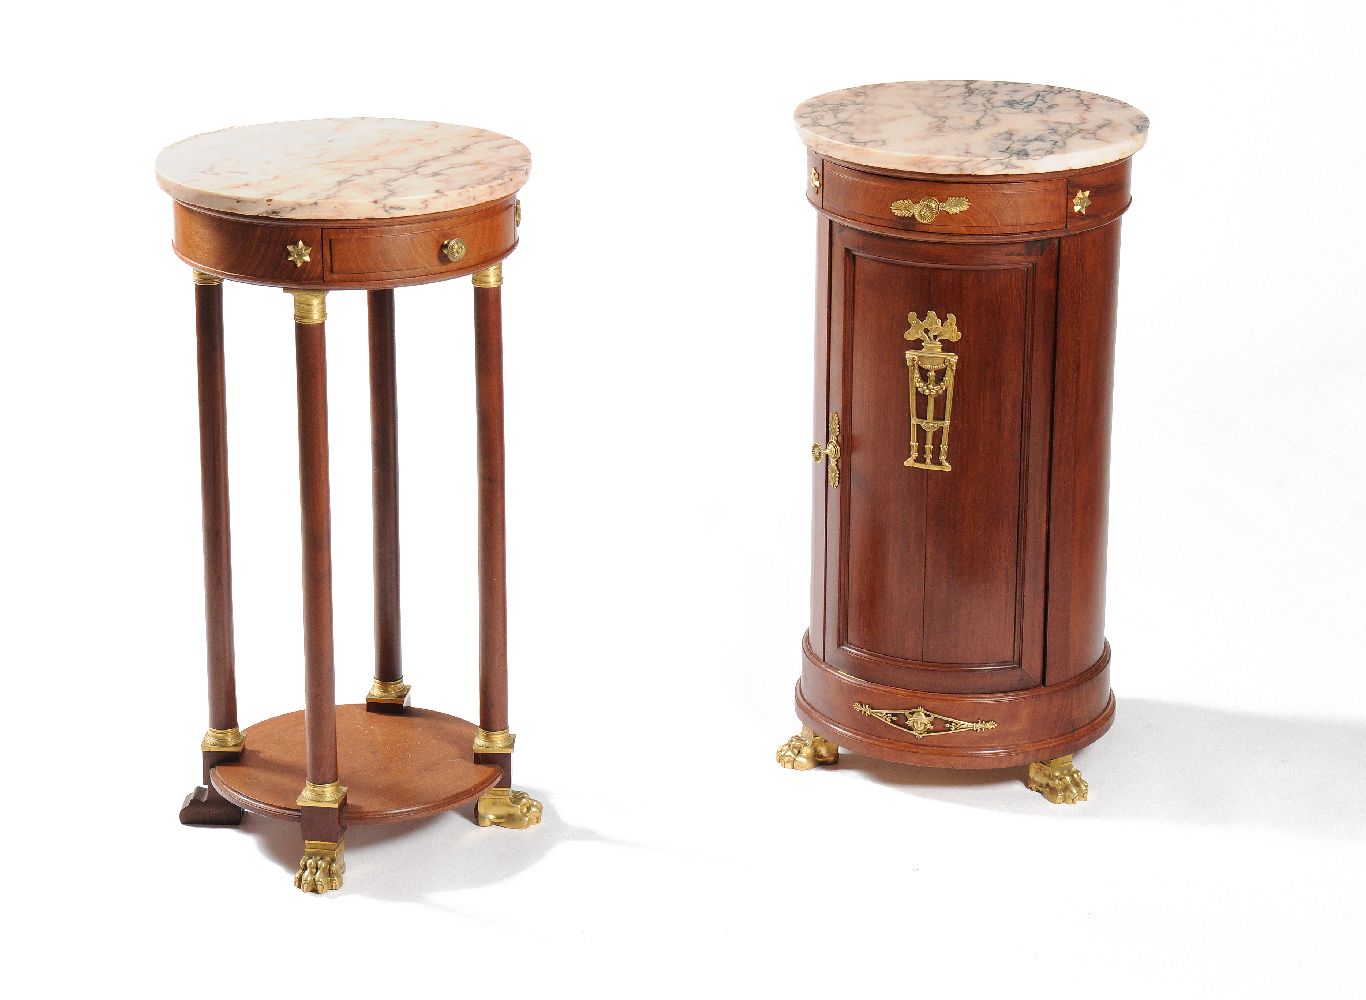 A pair of French mahogany and gilt metal mounted bedside tables, in Empire style